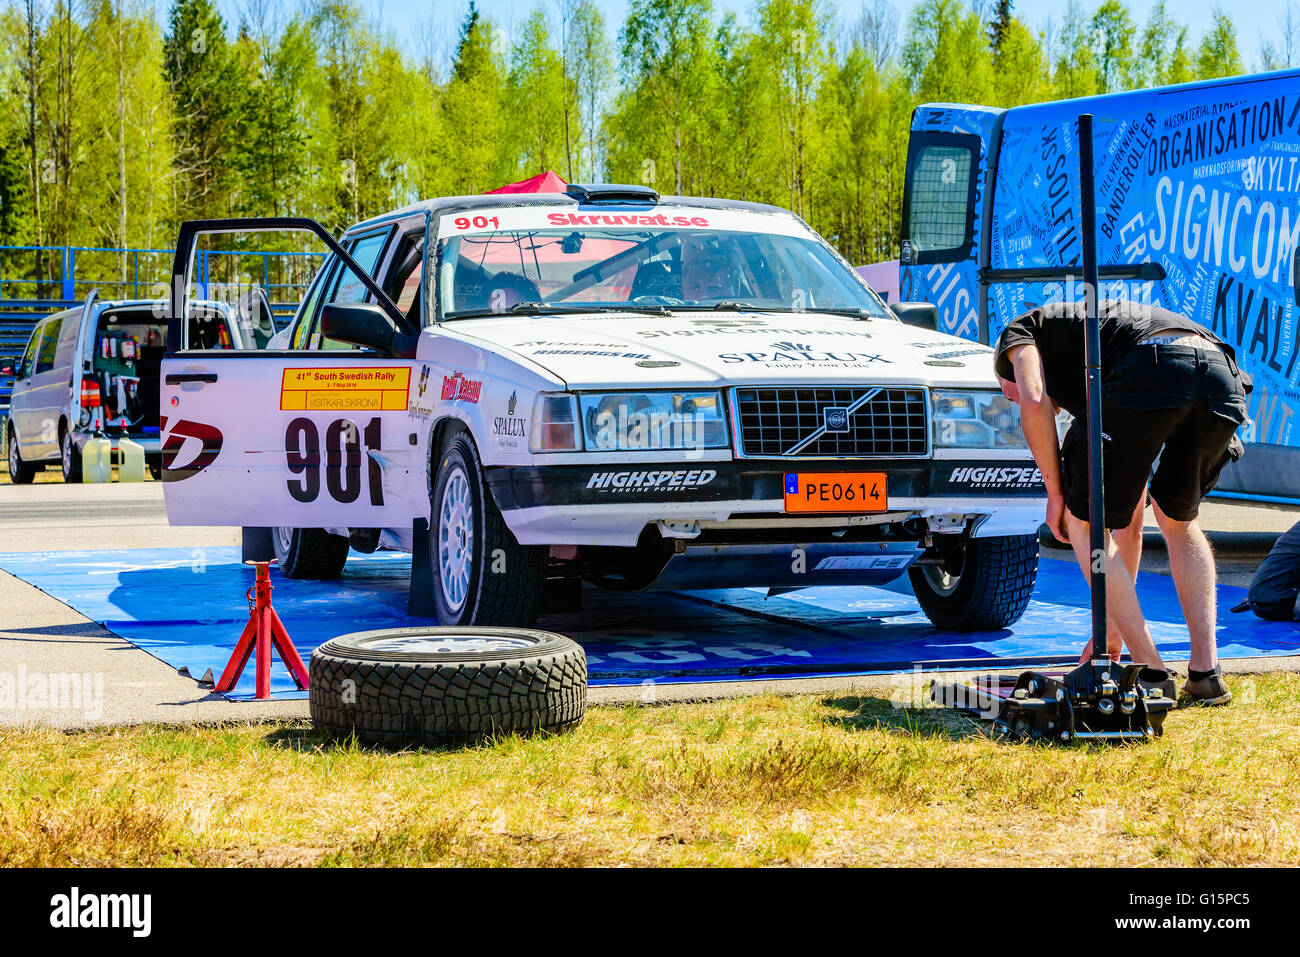 Emmaboda, Sweden - May 7, 2016: 41st South Swedish Rally in service depot. Depot stop for team Athley and Liljegren, pre racers Stock Photo